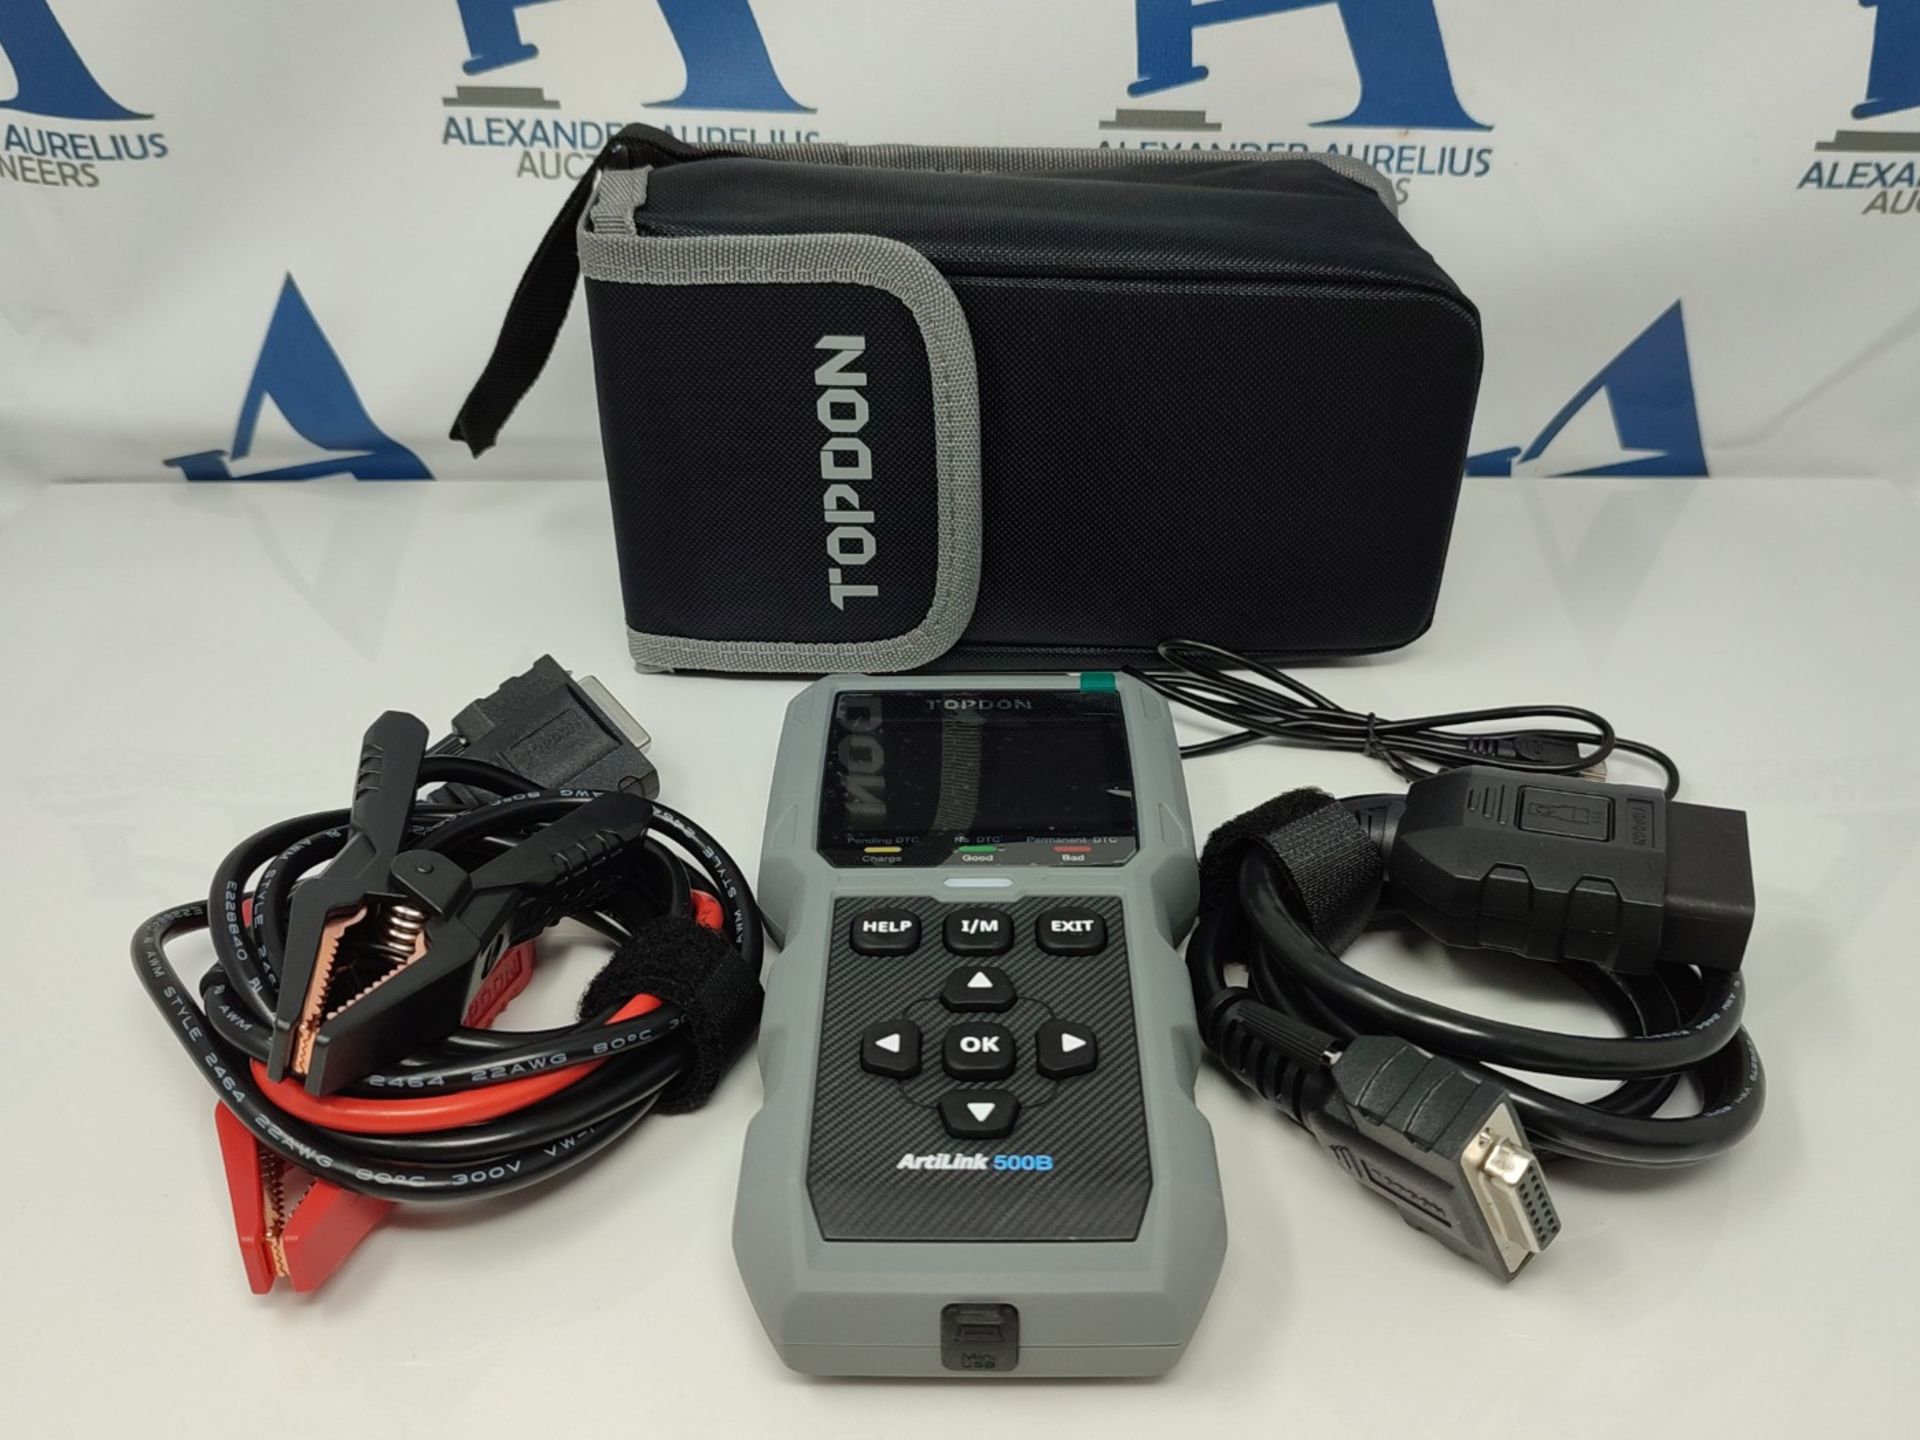 RRP £85.00 TOPDON AL500B OBD2 Code Reader, OBD2 Scanner with Full OBD2 Functions and Battery Test - Image 3 of 3